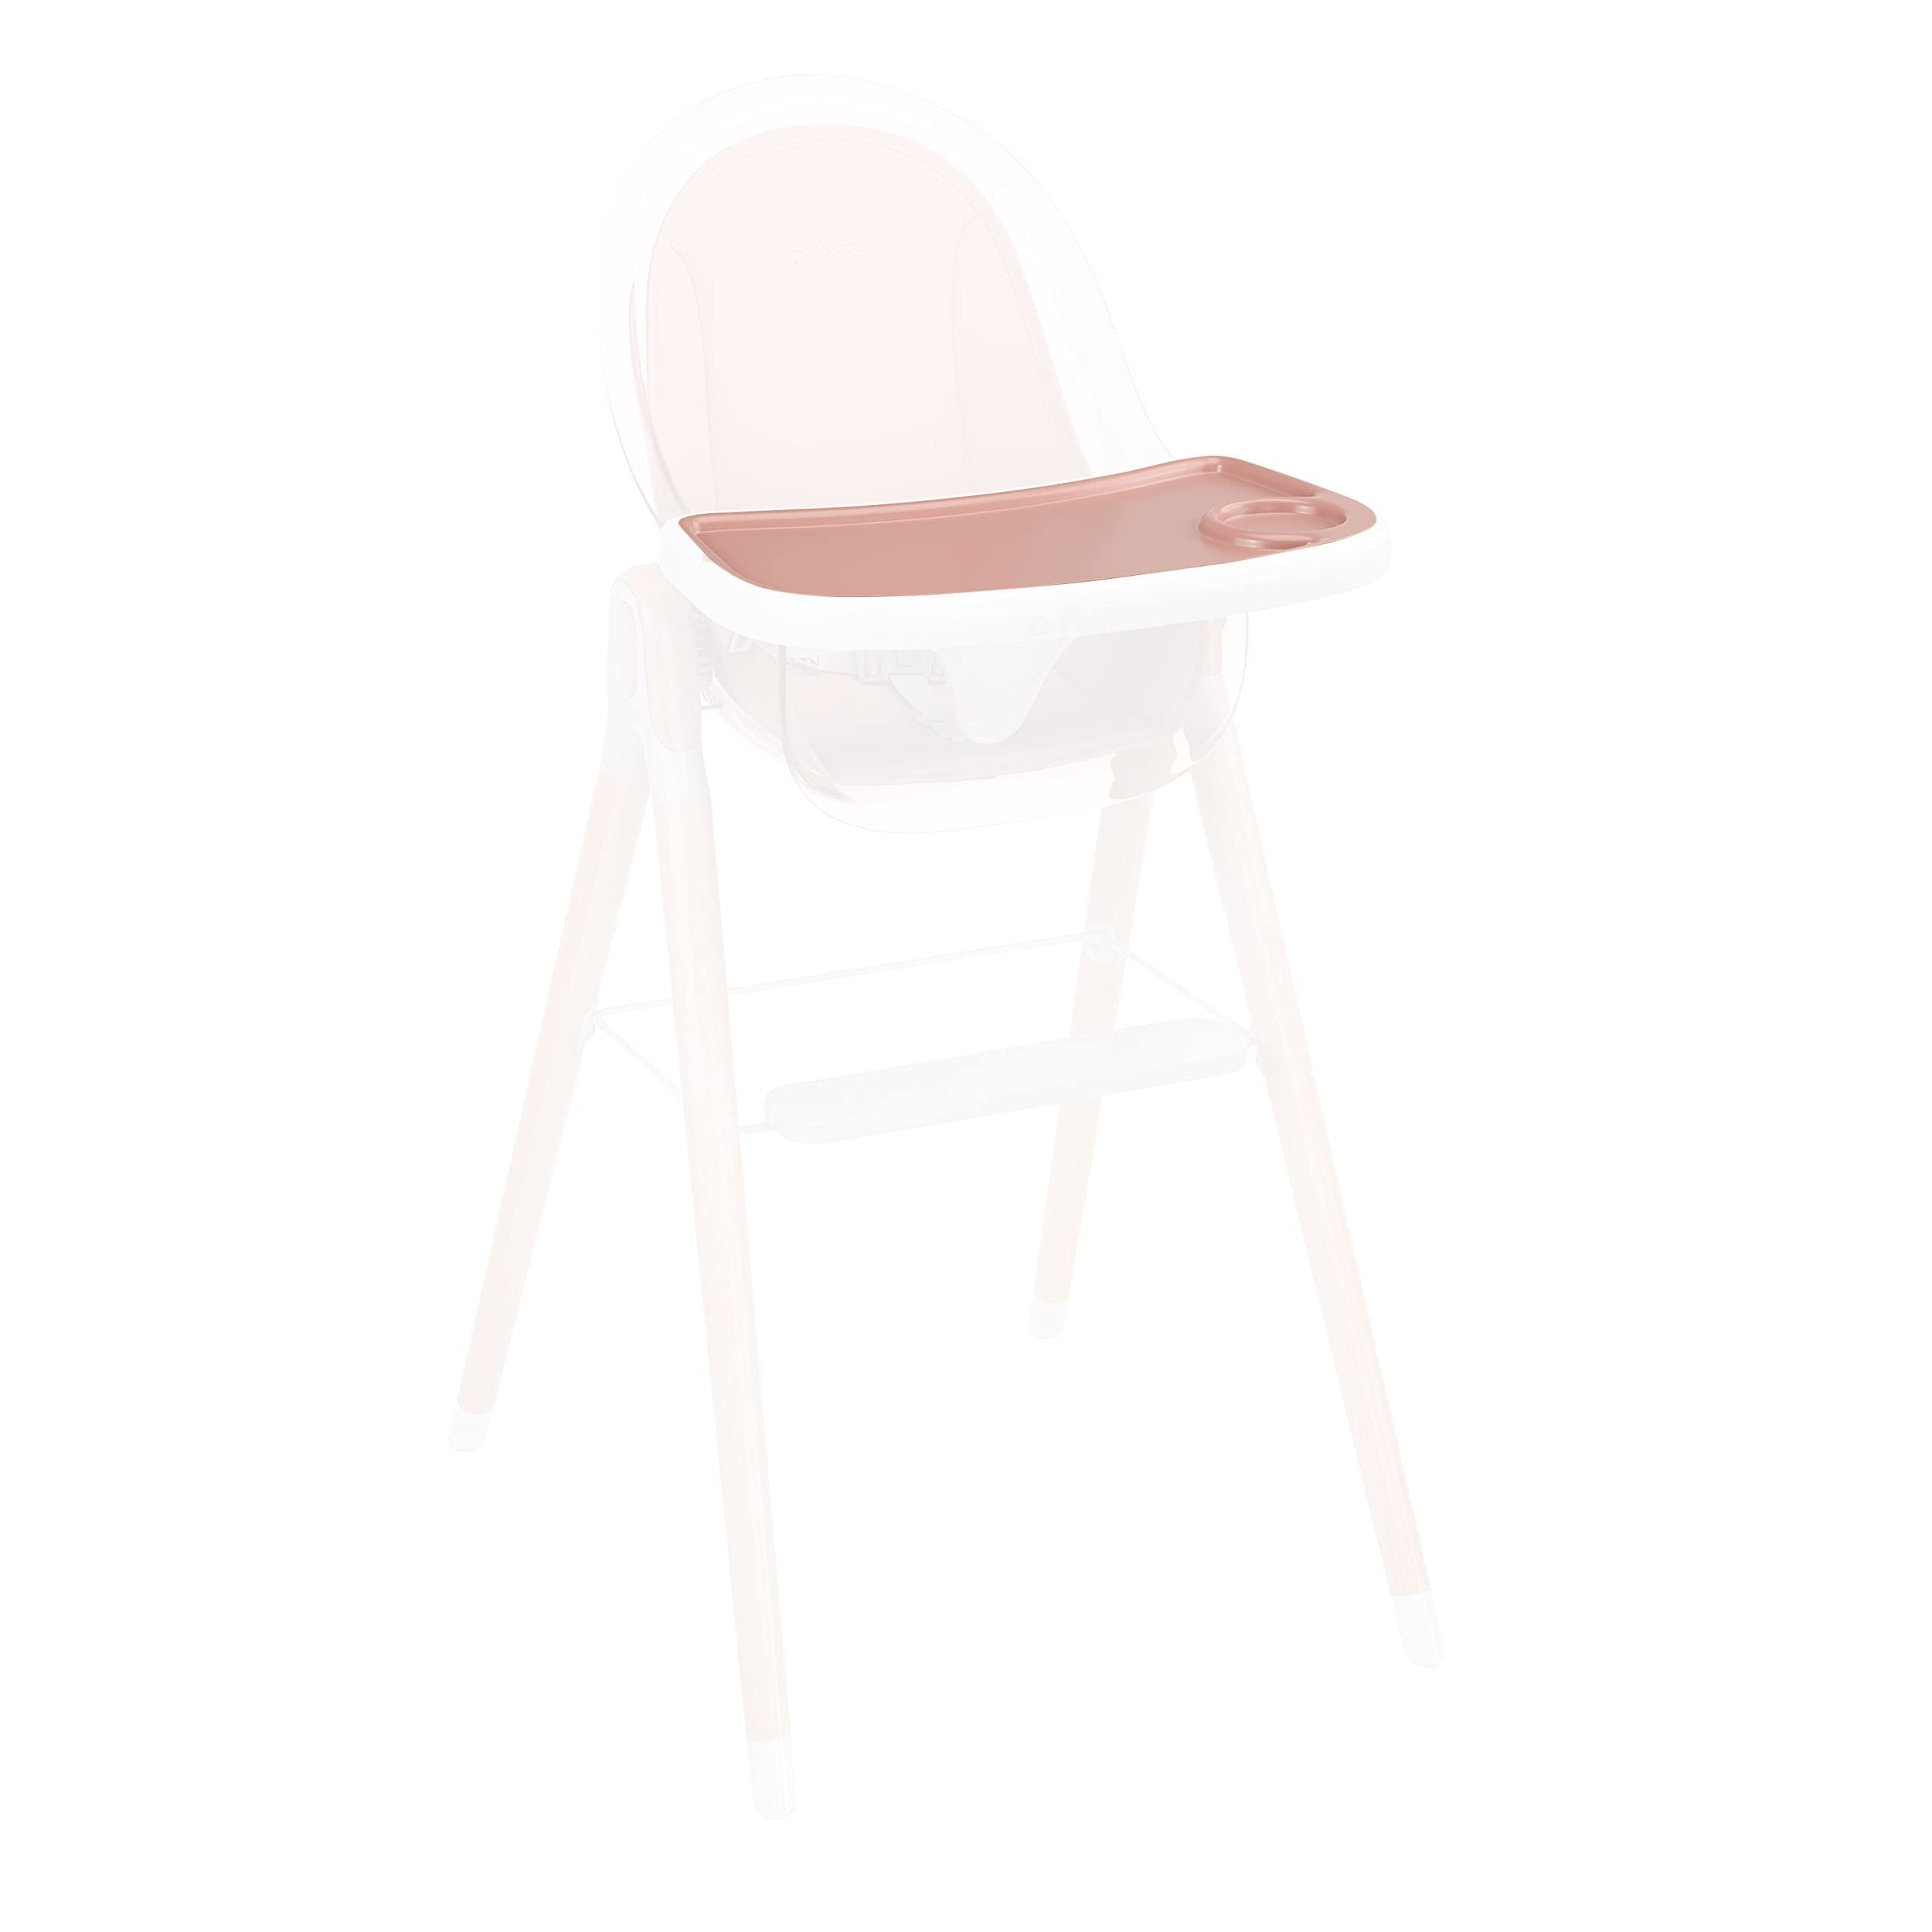 Deluxe High Chair Tray Insert - Pink  - Free Shipping & Returns